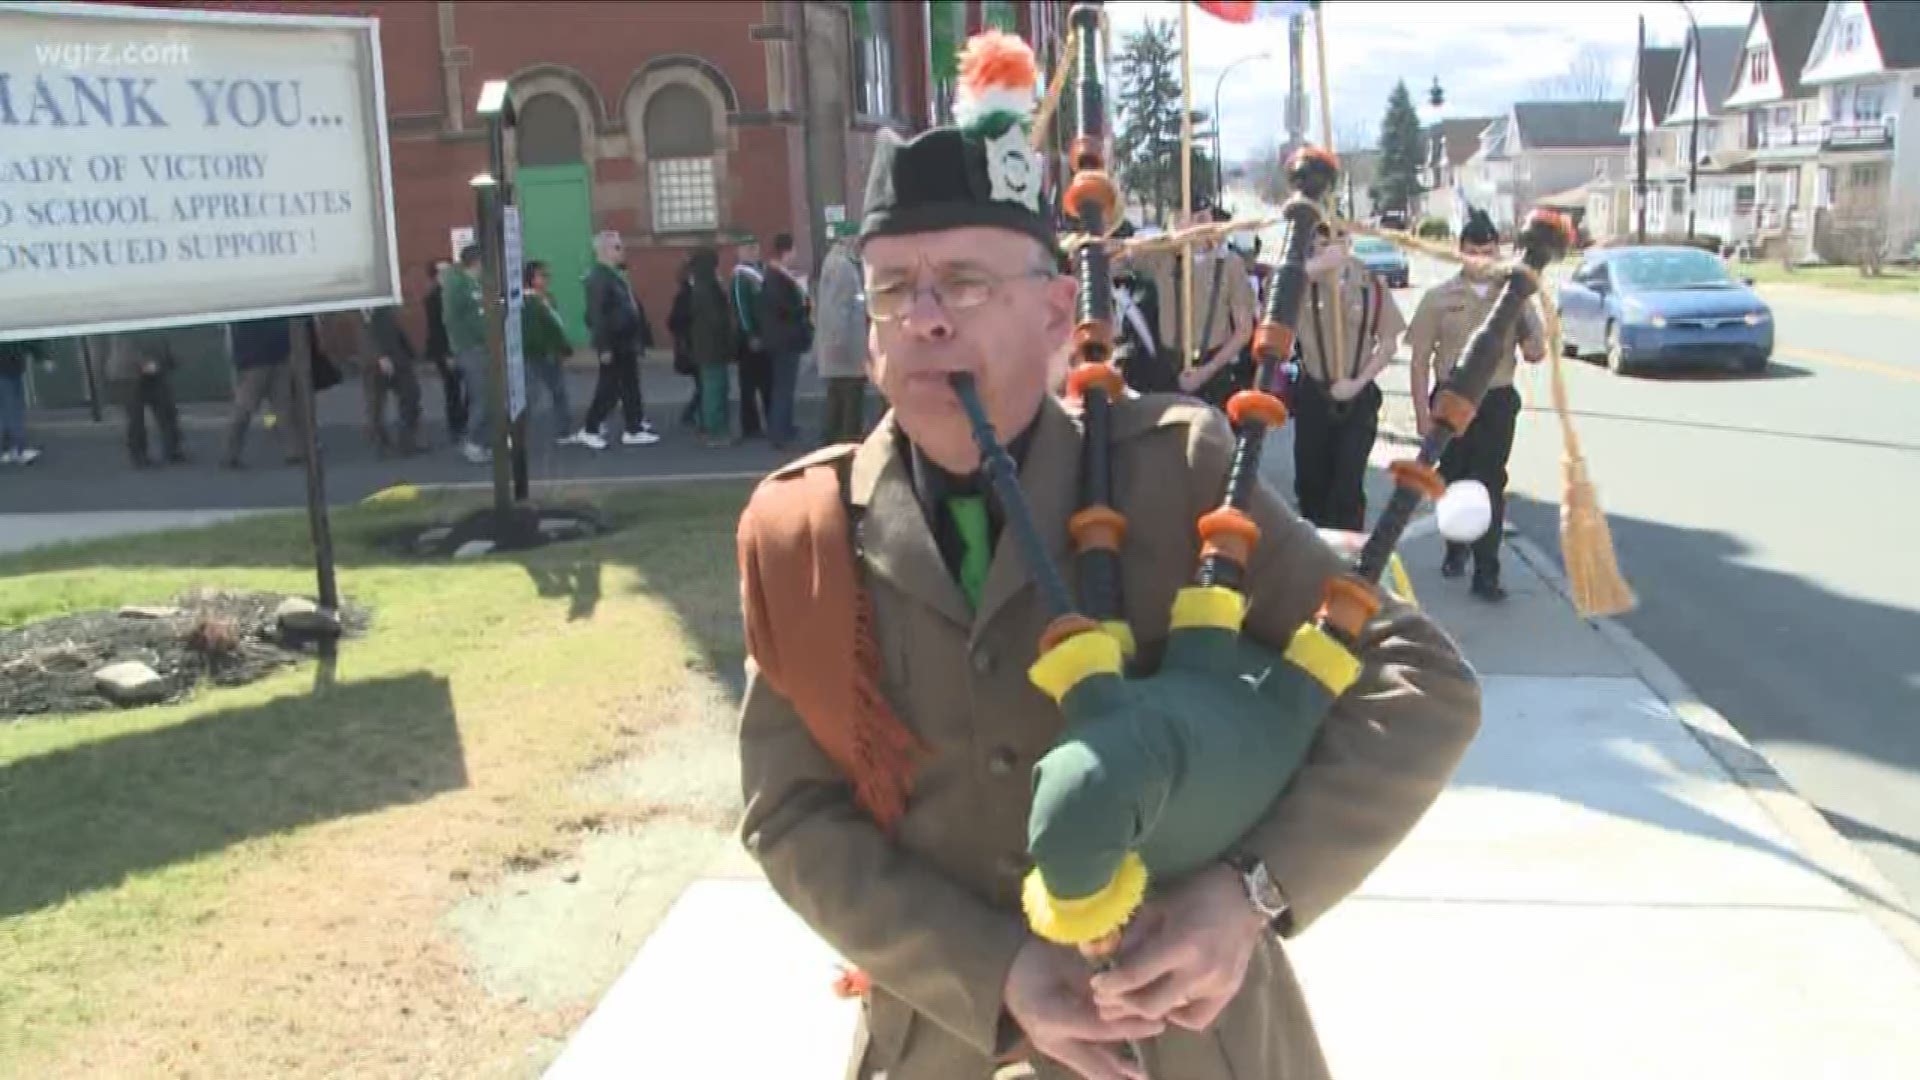 In Lackawanna, the city is hosting the shortest St. Patrick's Day Parade, now in its 73rd year.